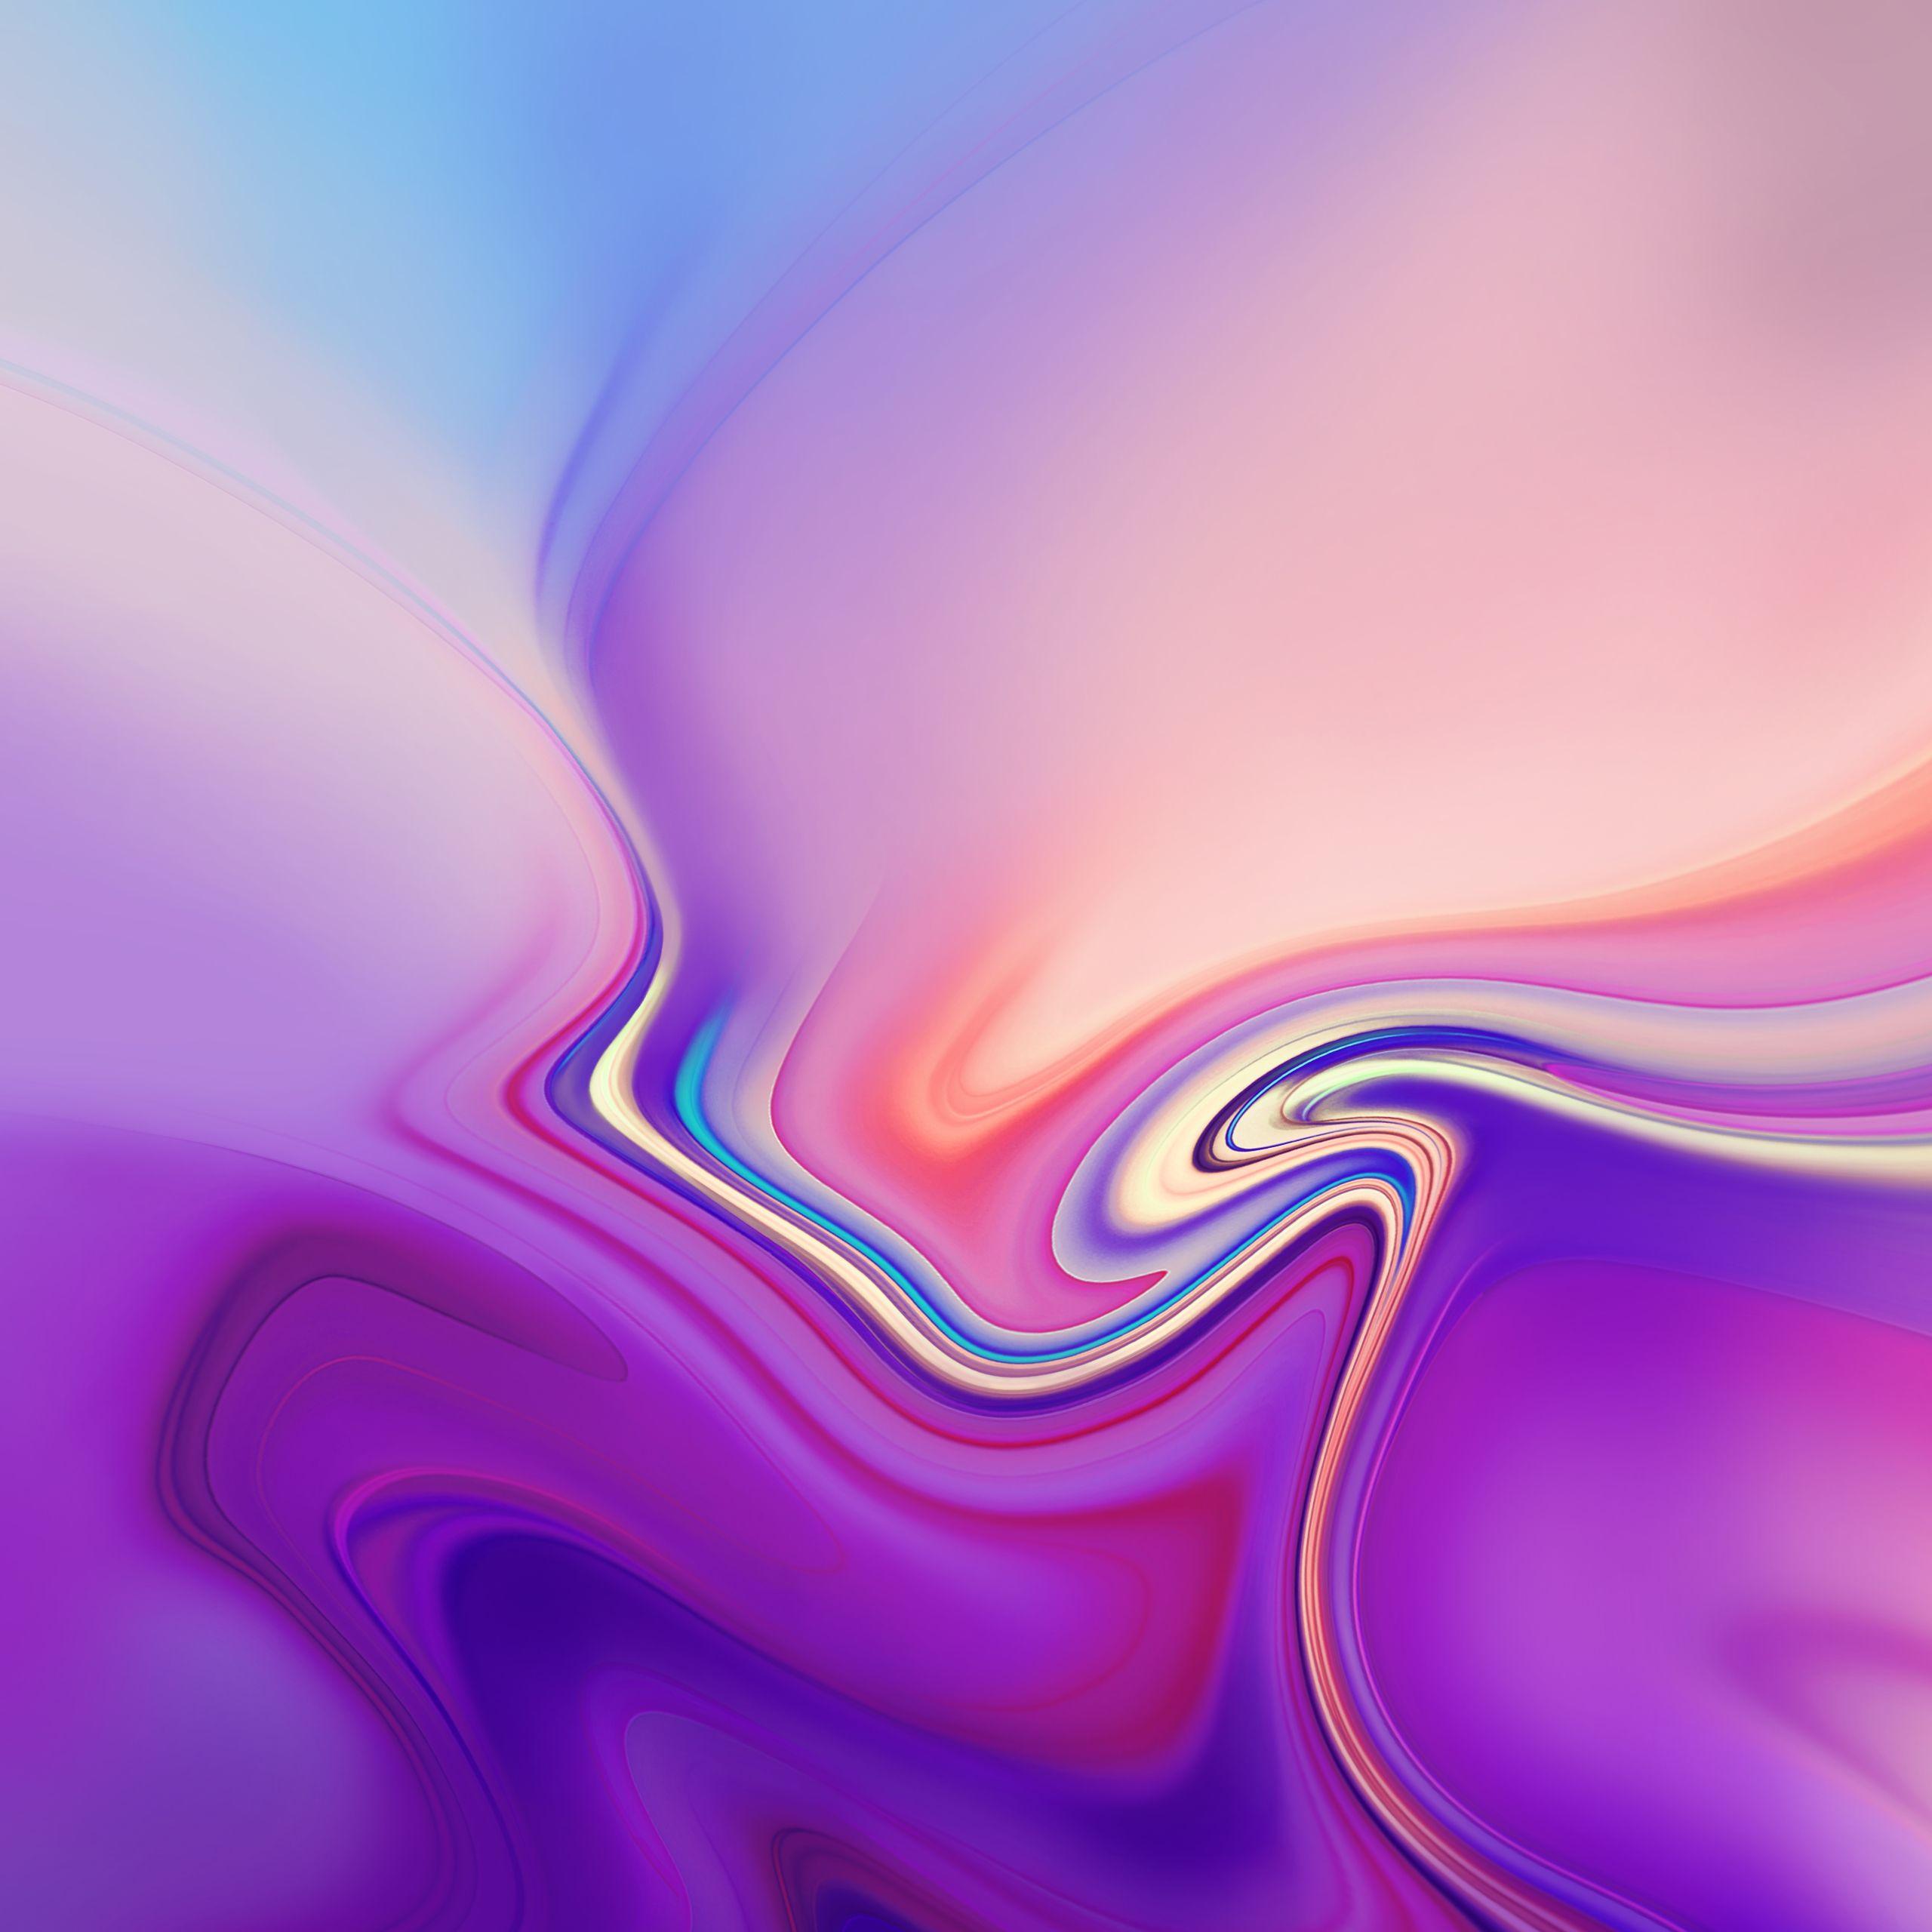 Samsung Galaxy Note 9 wallpaper are here 12 in full resolution